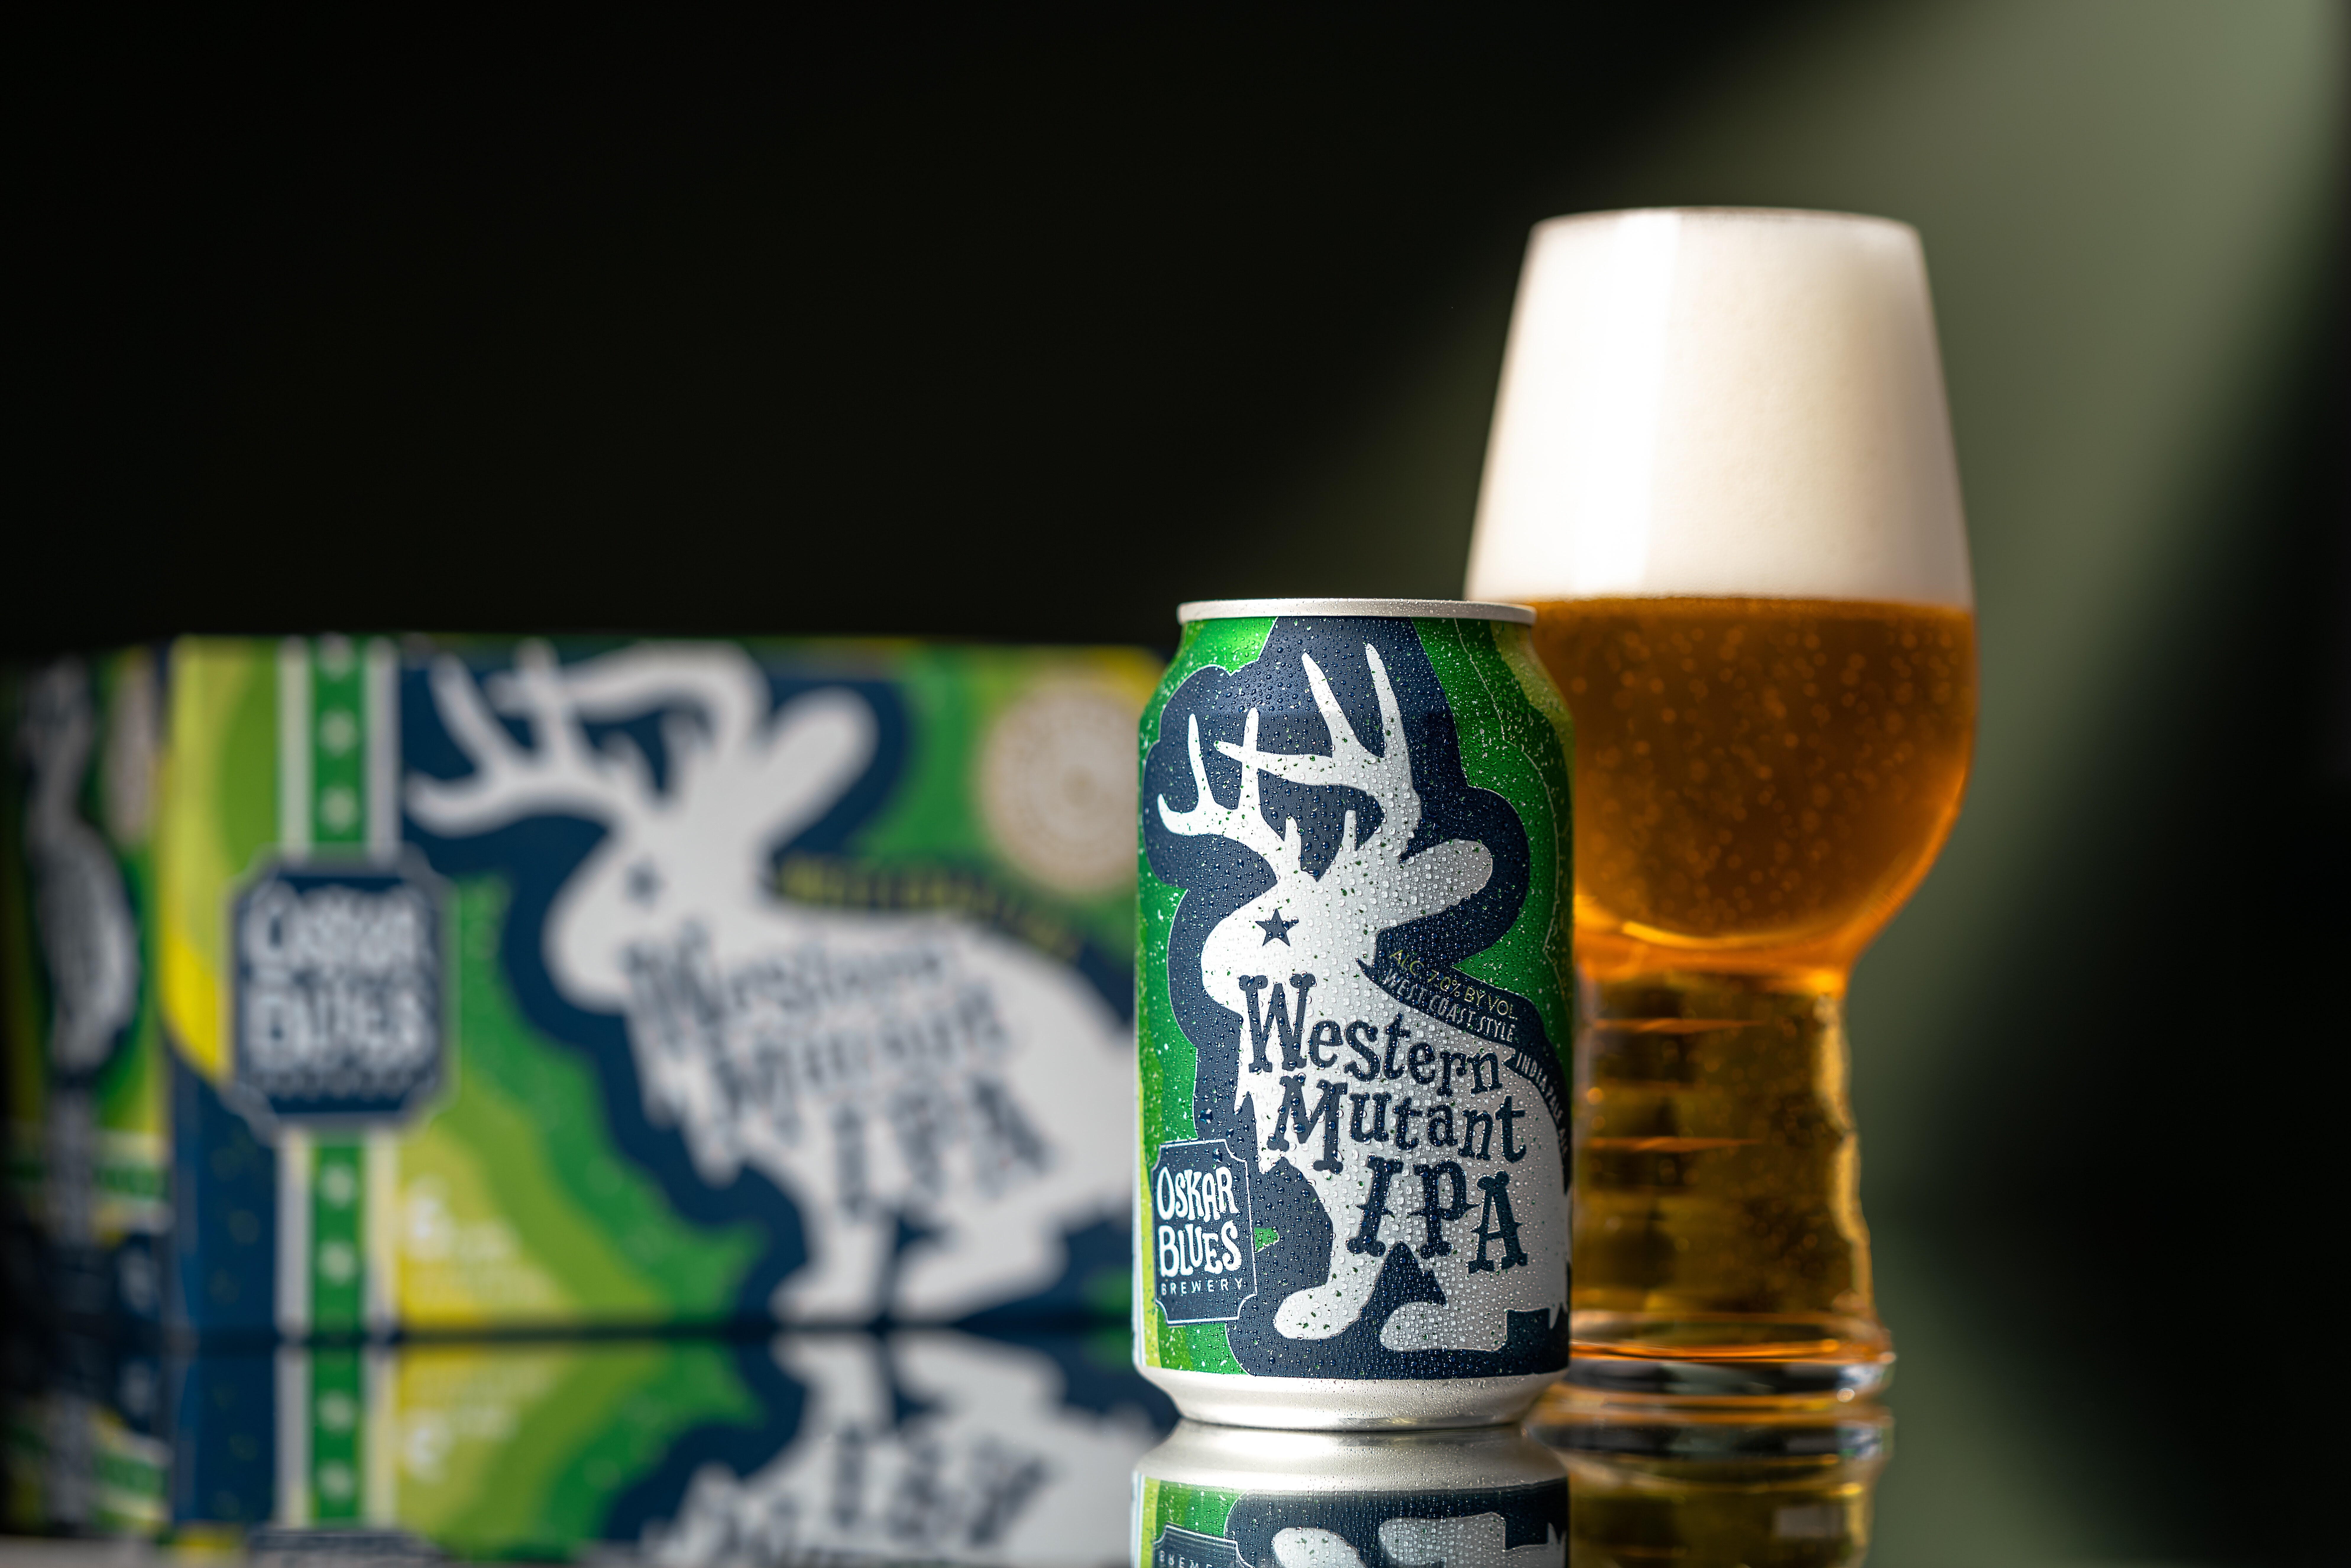 Western Mutant West Coast Style IPA Launches Oskar Blues Brewery's New Rotating IPA Series